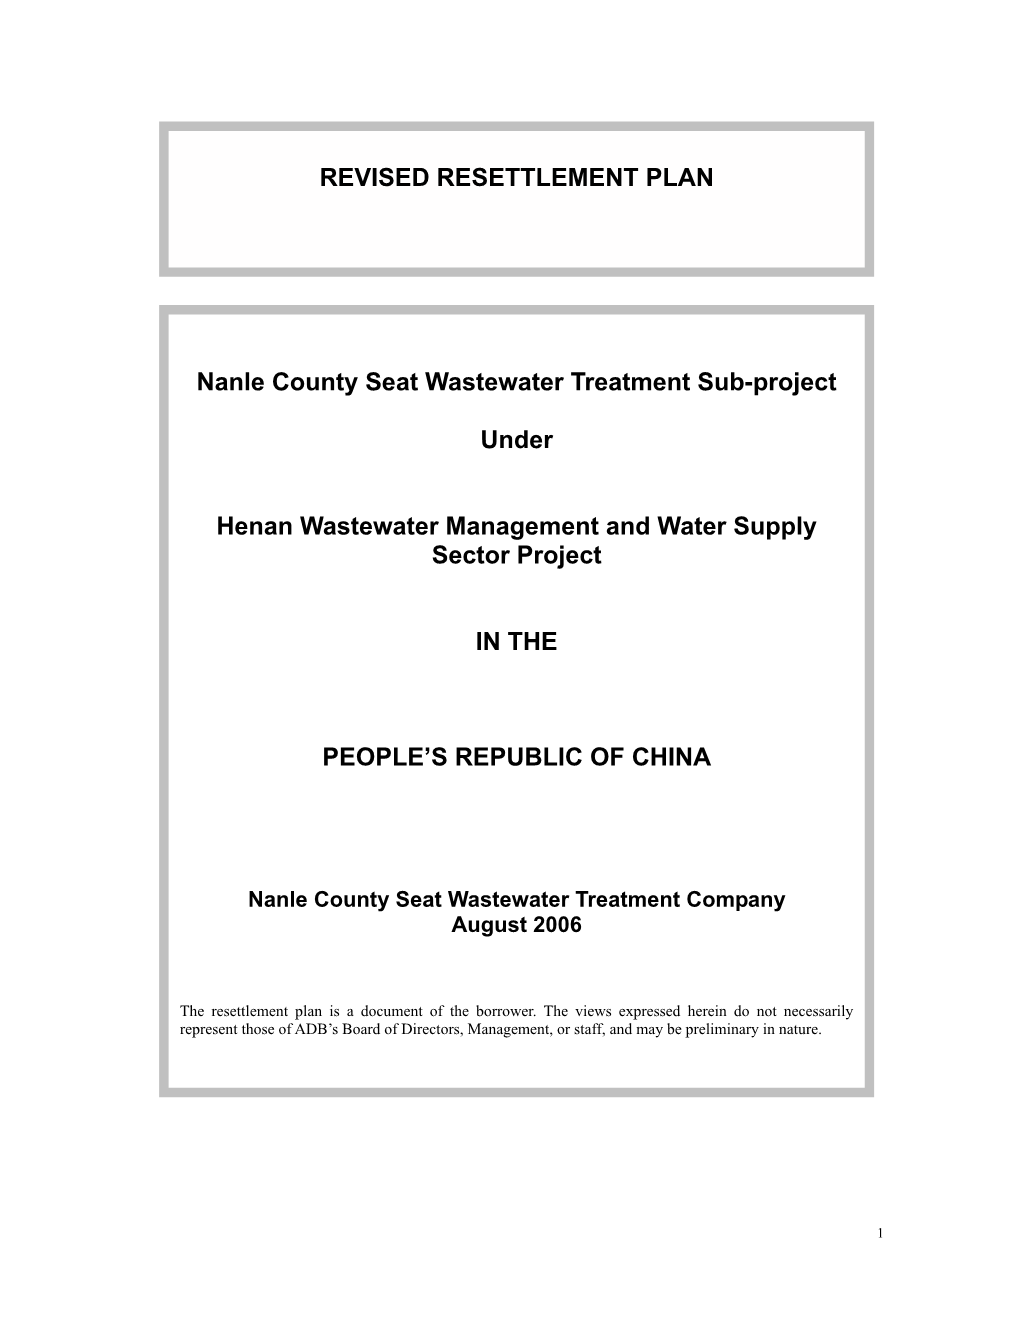 Nanle County Seat Wastewater Treatment Sub-Project Under Henan